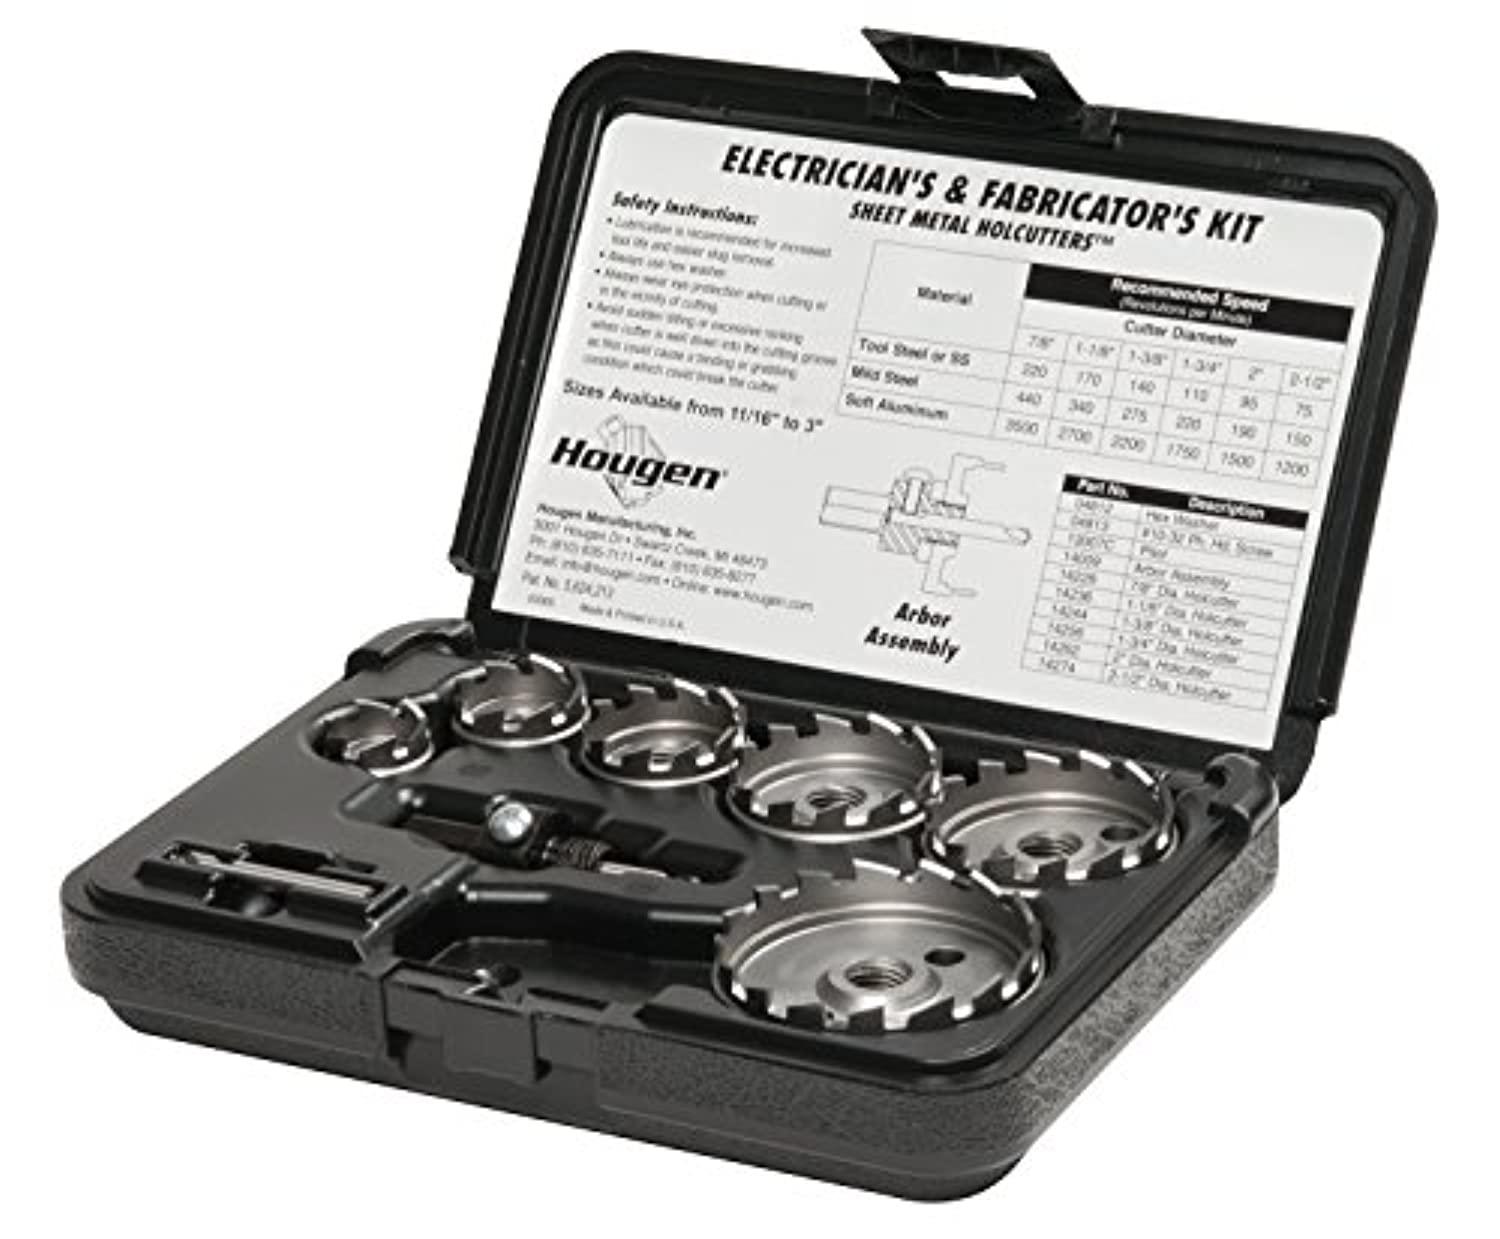 hougen 14005 11 piece electrician and fabricators kit 7/8 to 2-1/2" - 1/8" cutting depth high speed steel for sheet metal hol